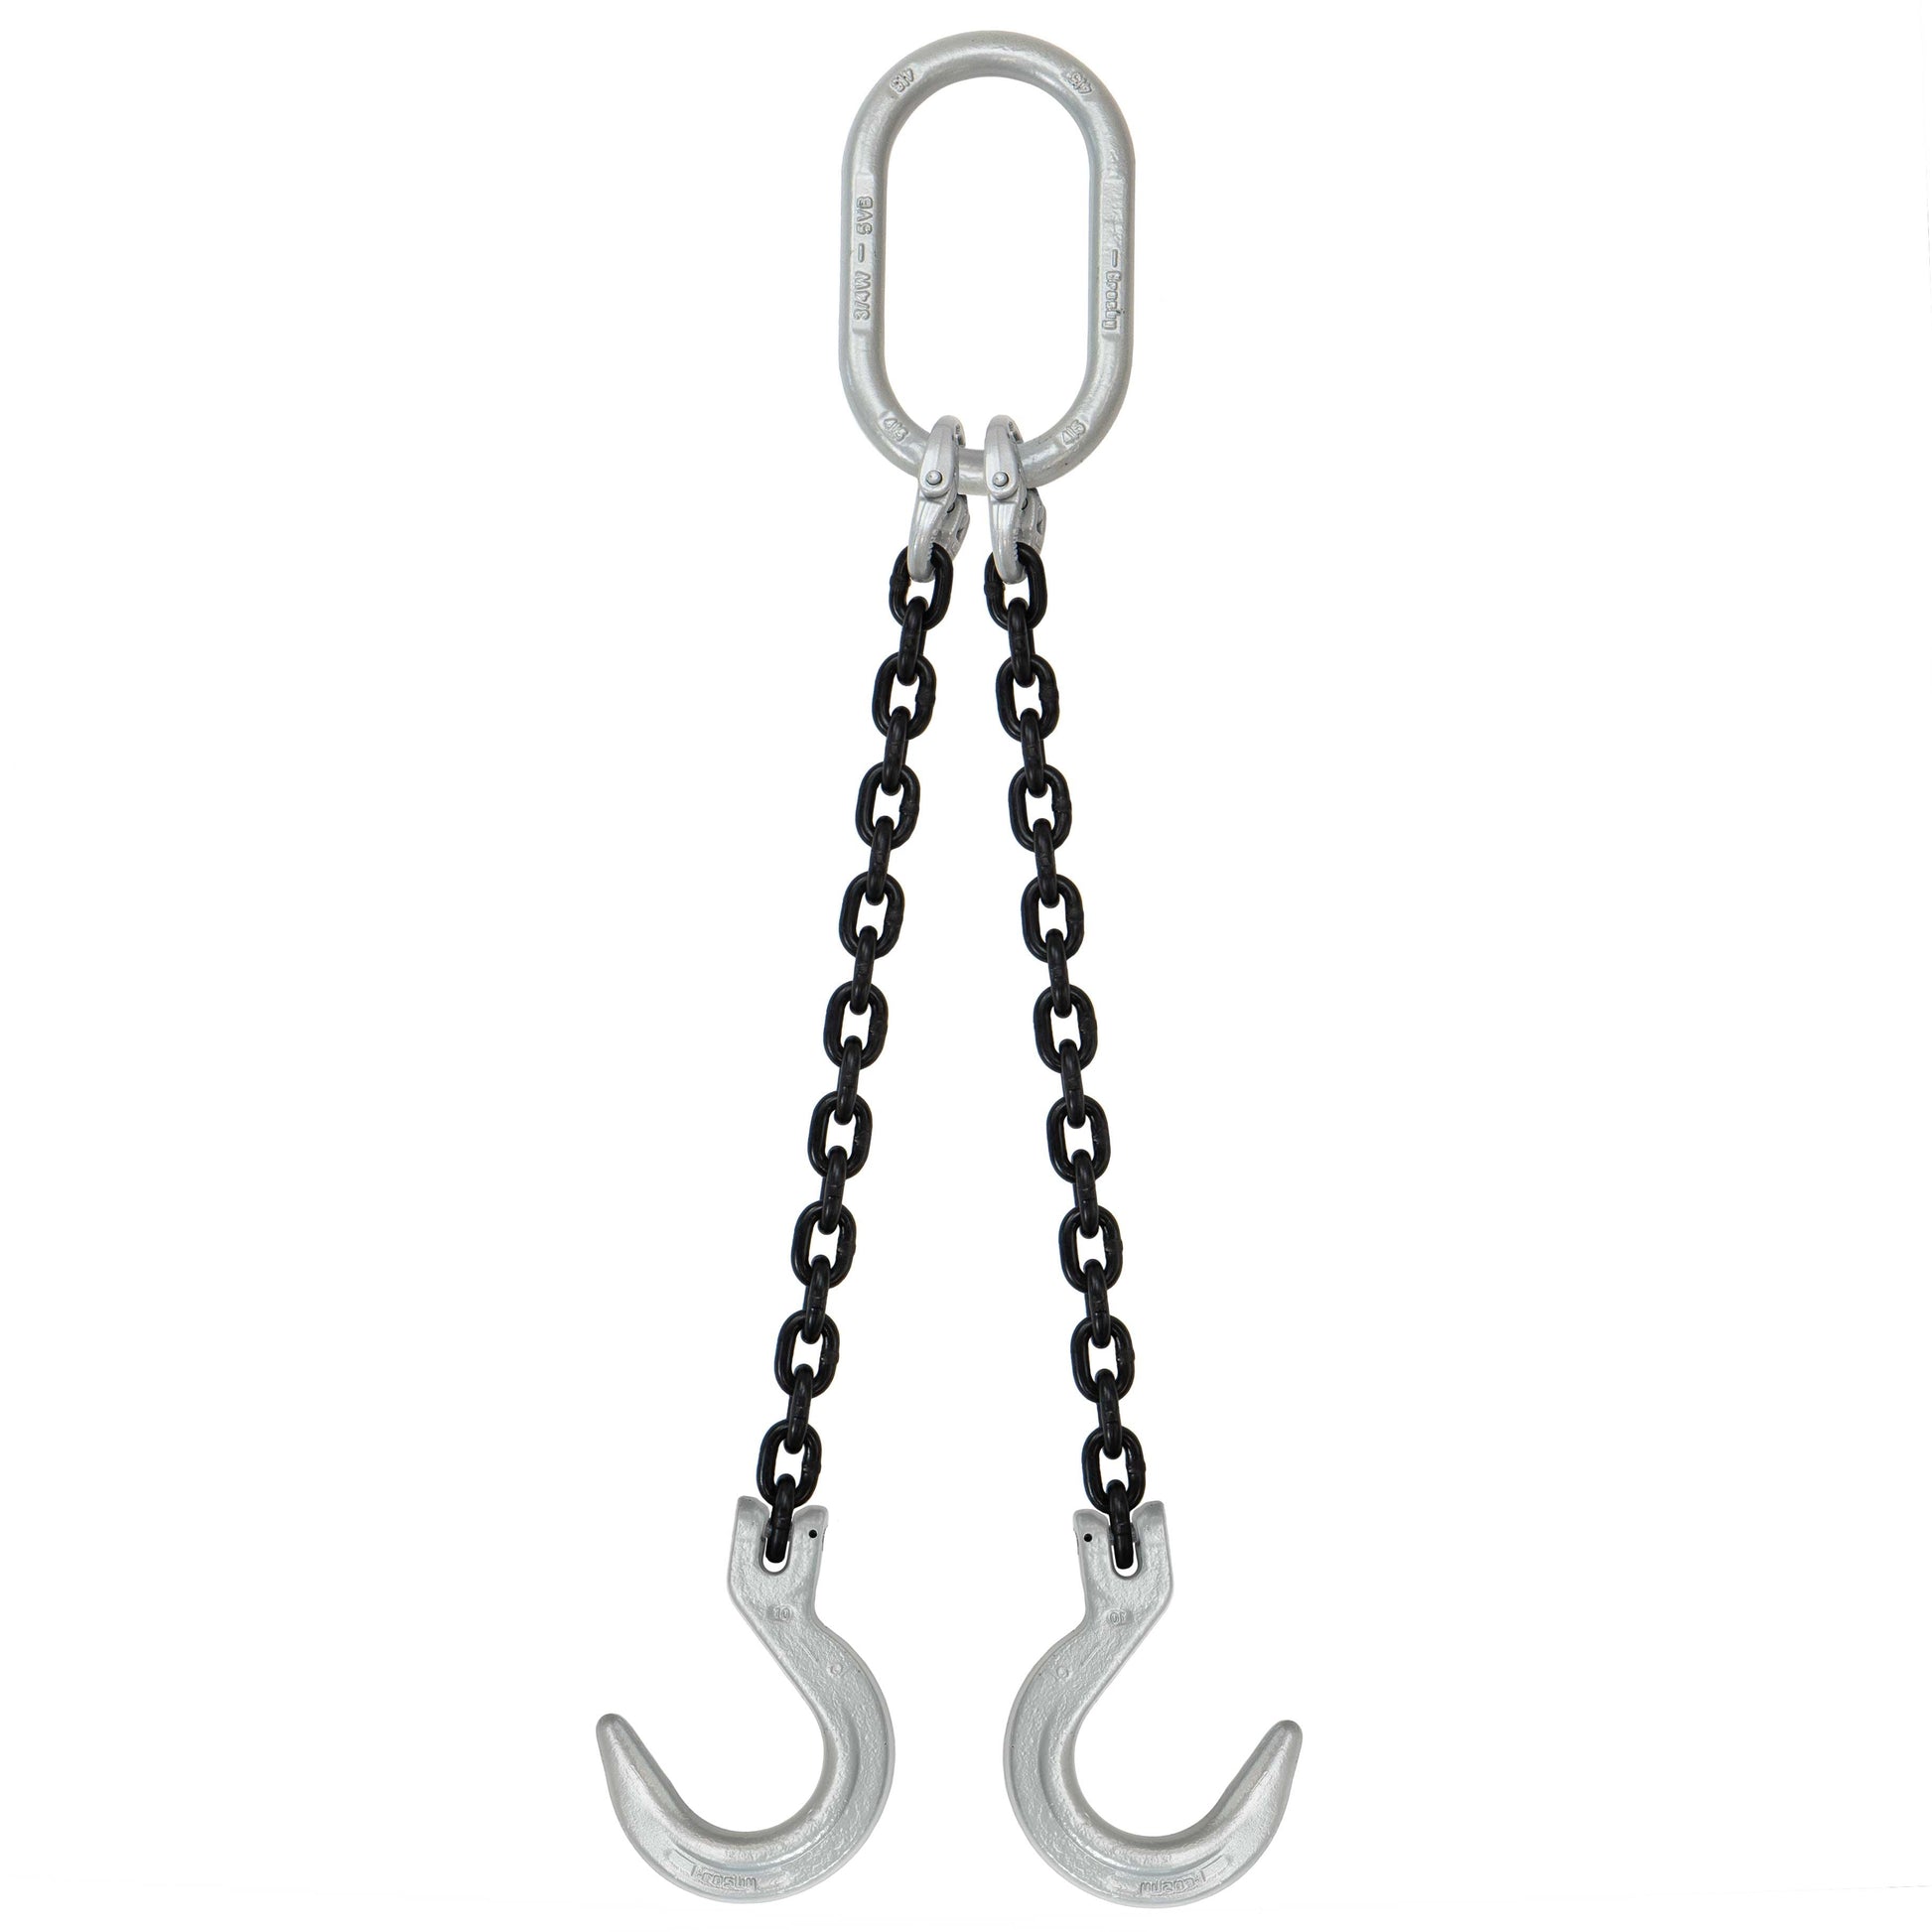 12 inch x 18 foot Domestic 2 Leg Chain Sling w Crosby Foundry Hooks Grade 100 image 1 of 2